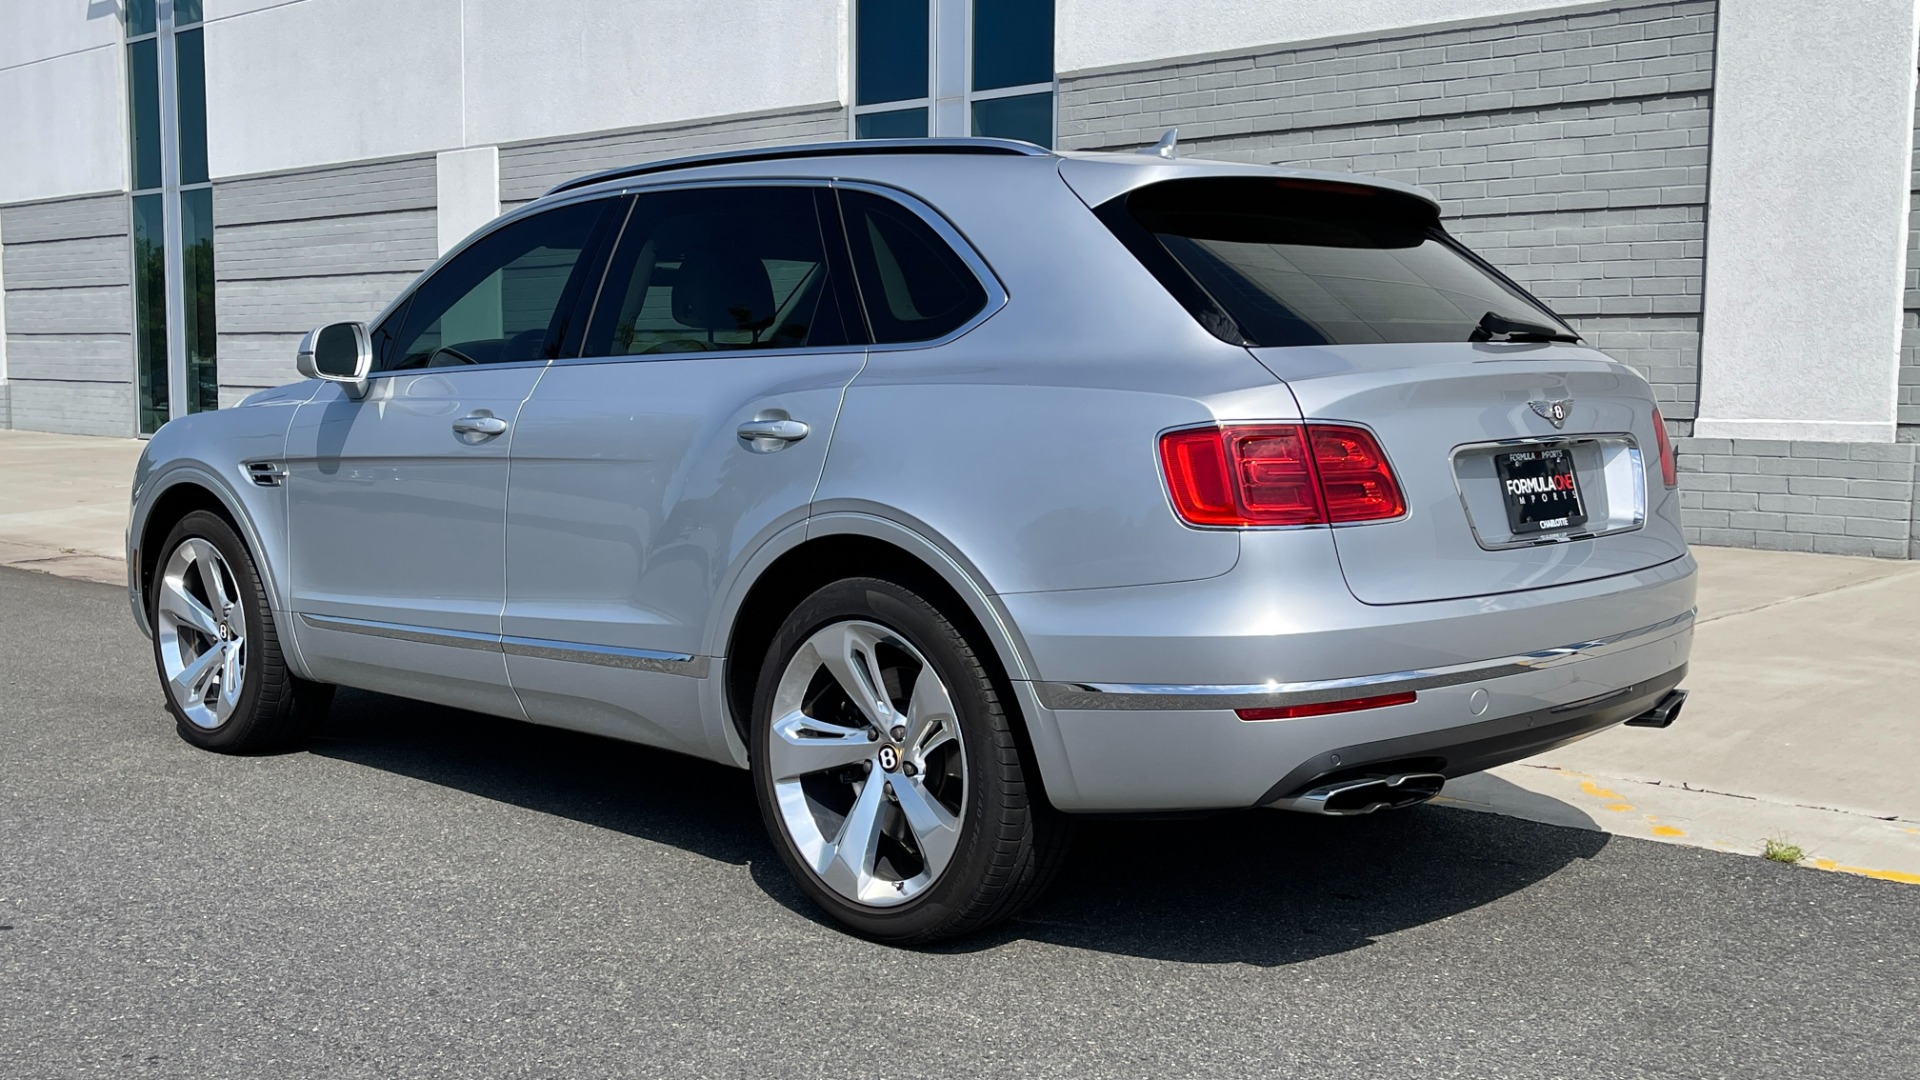 Used 2019 Bentley BENTAYGA V8 / AWD / NAV / SUNROOF / LED LIGHTING / PREMIUM AUDIO / REARVIEW for sale $125,000 at Formula Imports in Charlotte NC 28227 5